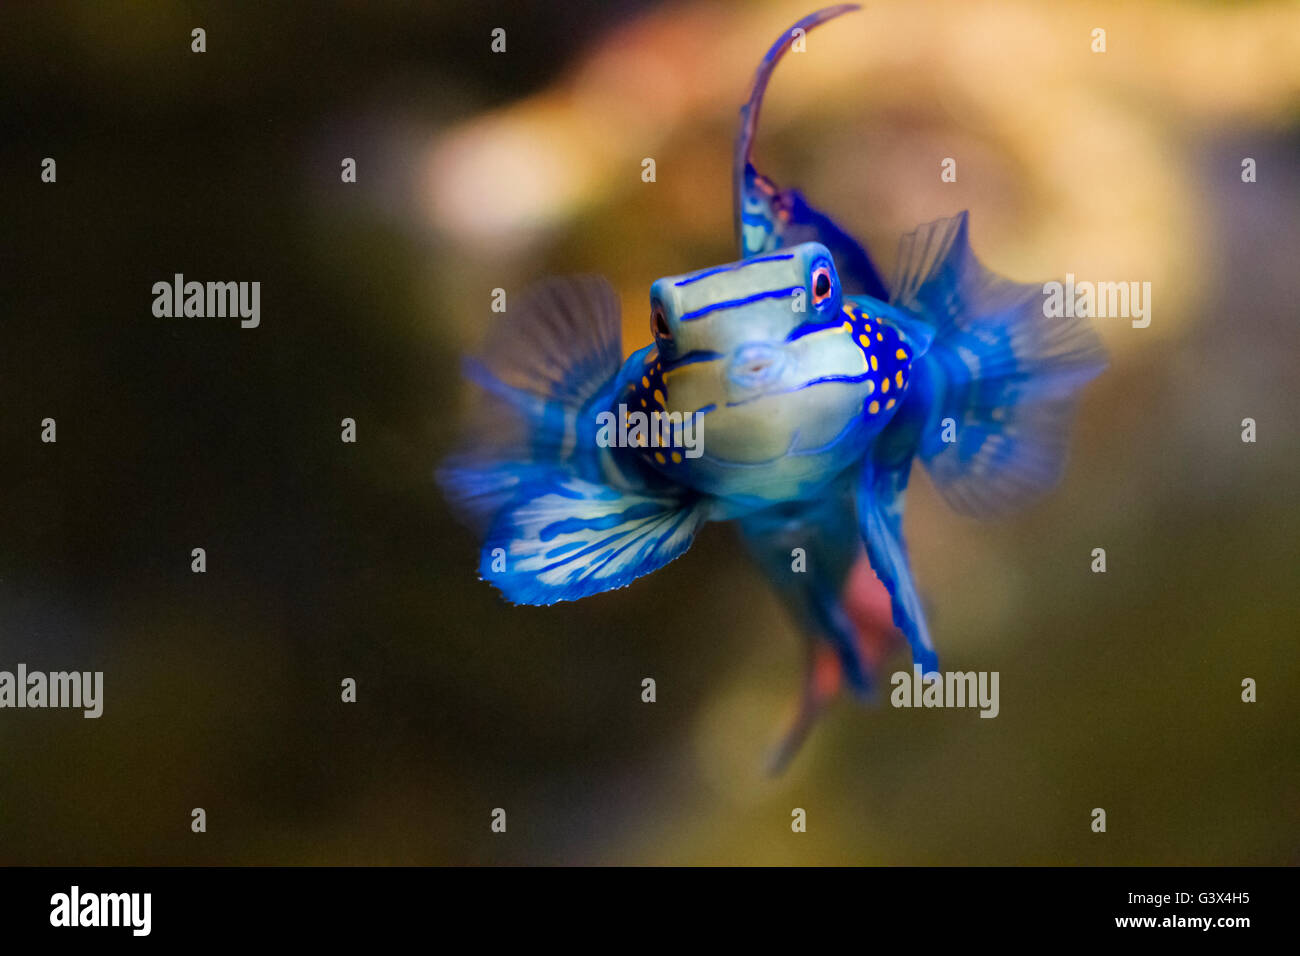 A small blue tropical fish observing through the glass of its aquarium. Stock Photo